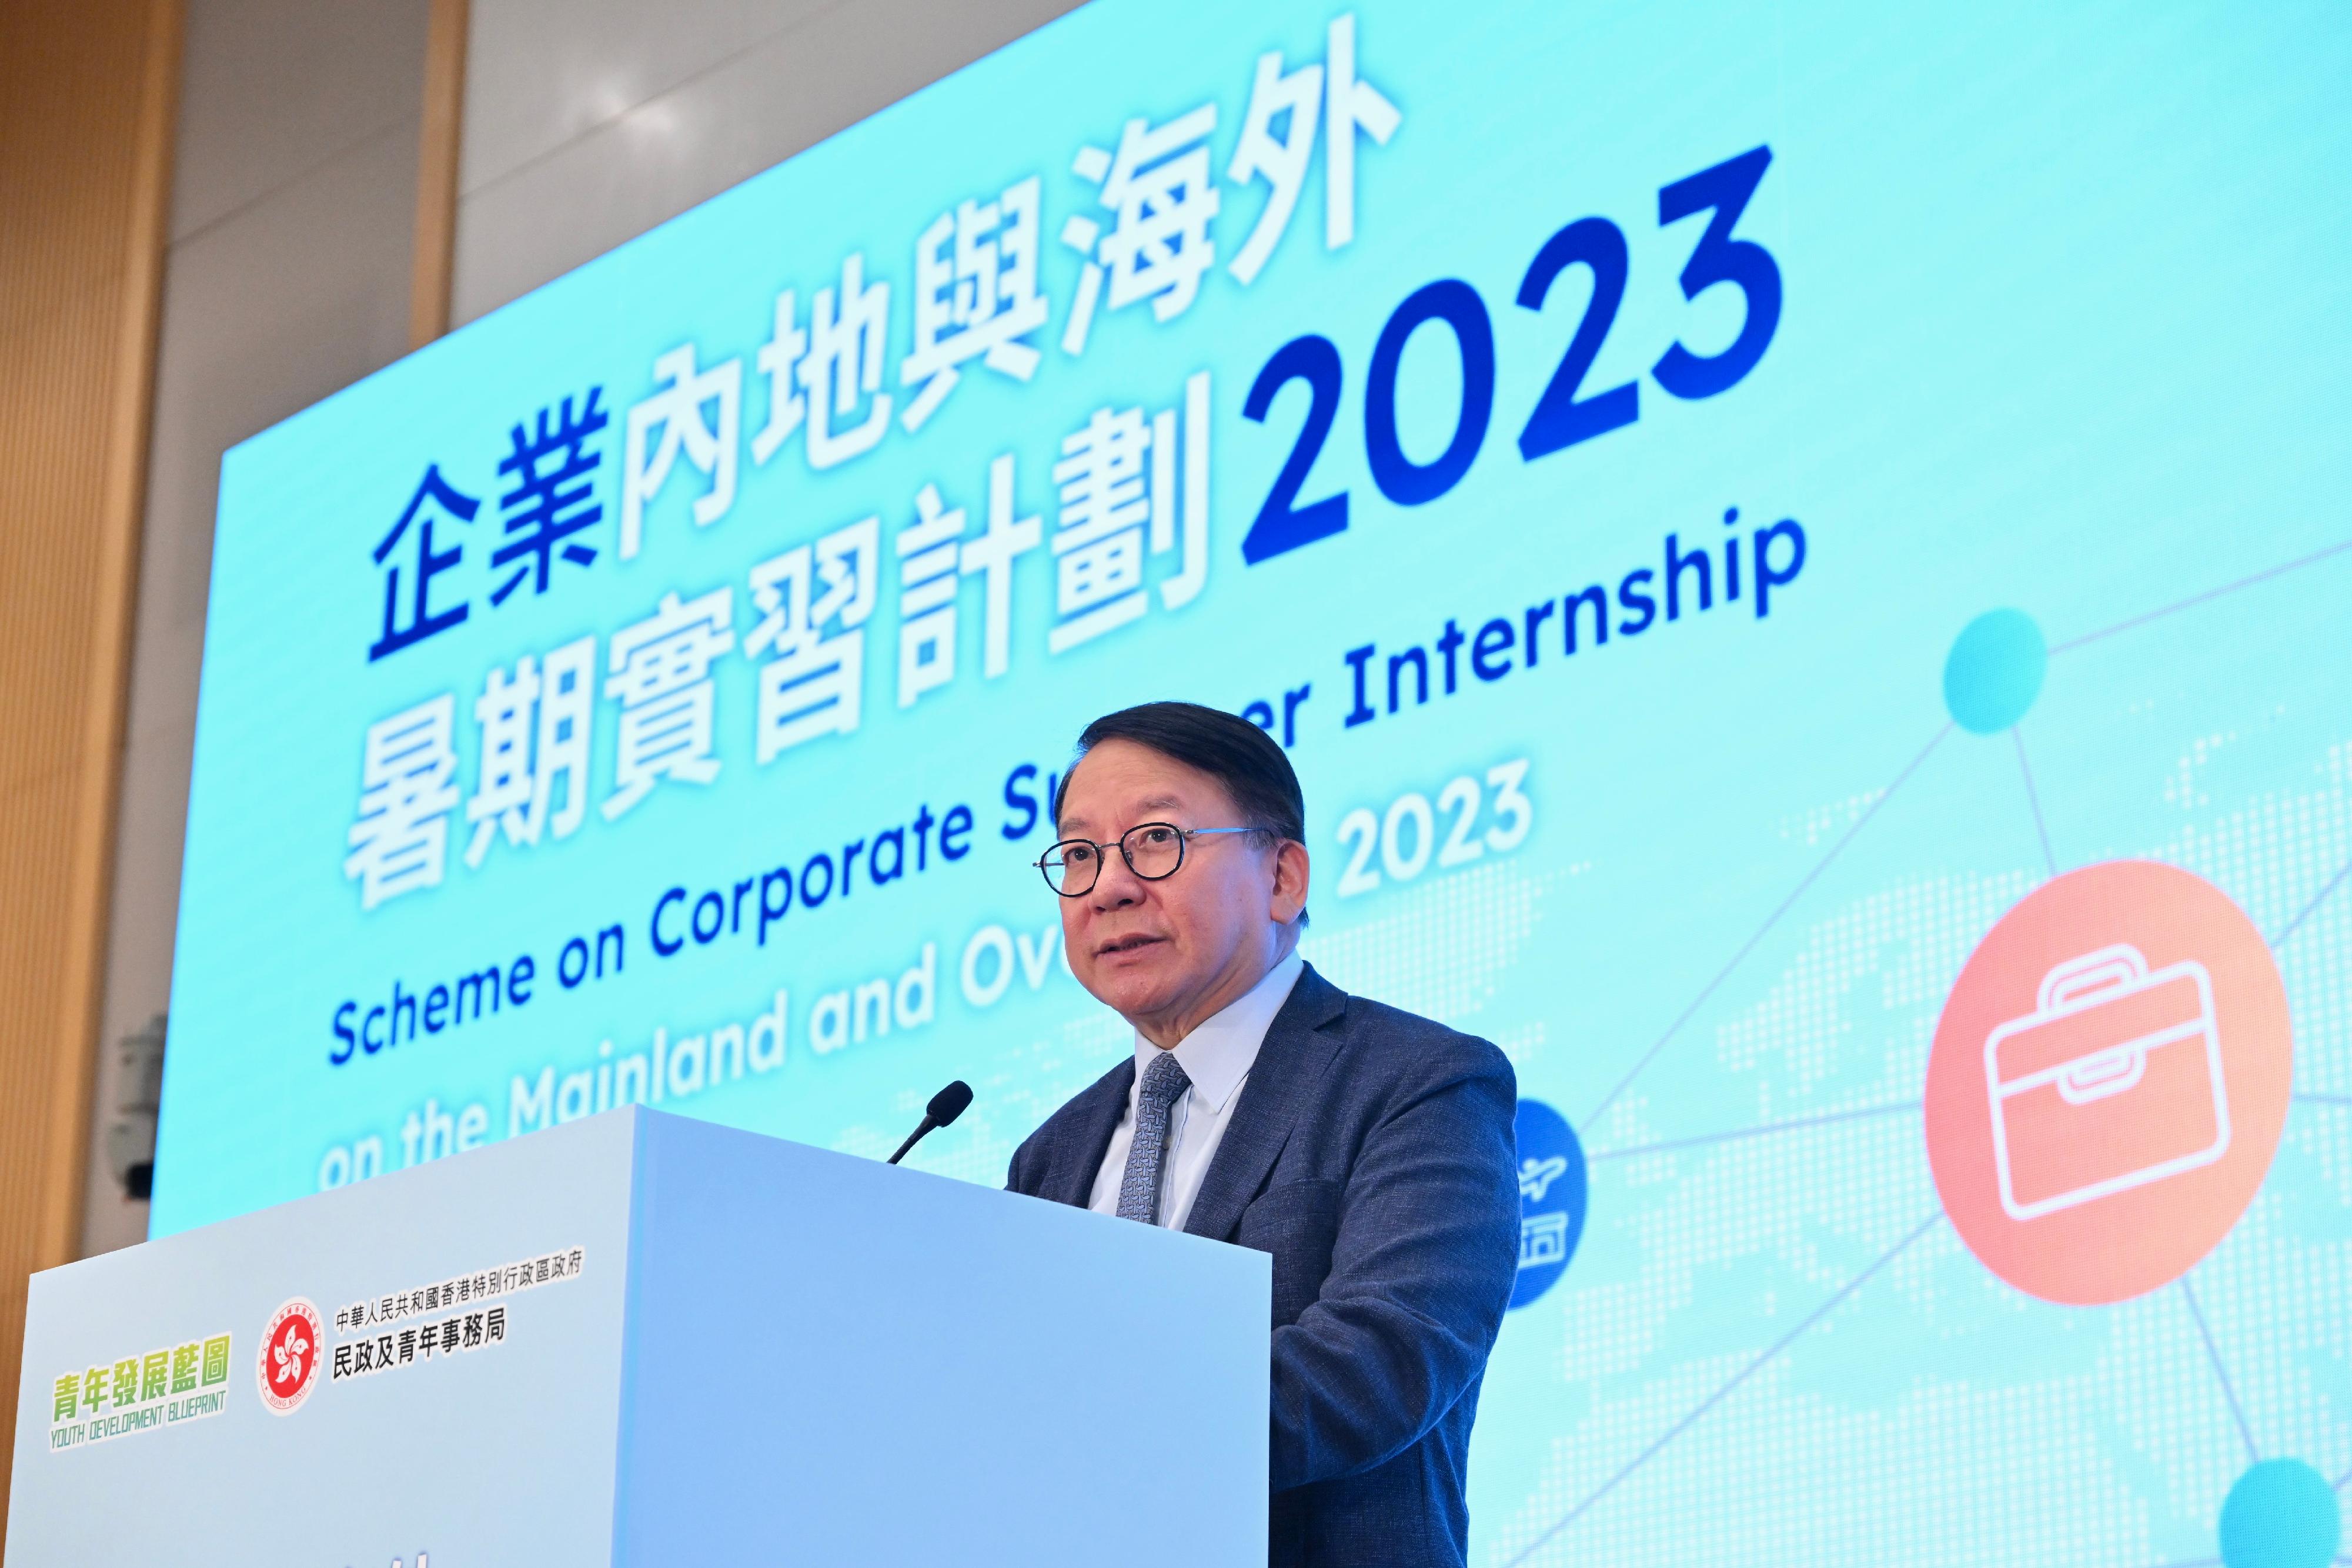 The Chief Secretary for Administration, Mr Chan Kwok-ki, speaks at the kick-off ceremony of the Scheme on Corporate Summer Internship on the Mainland and Overseas 2023 today (June 5).